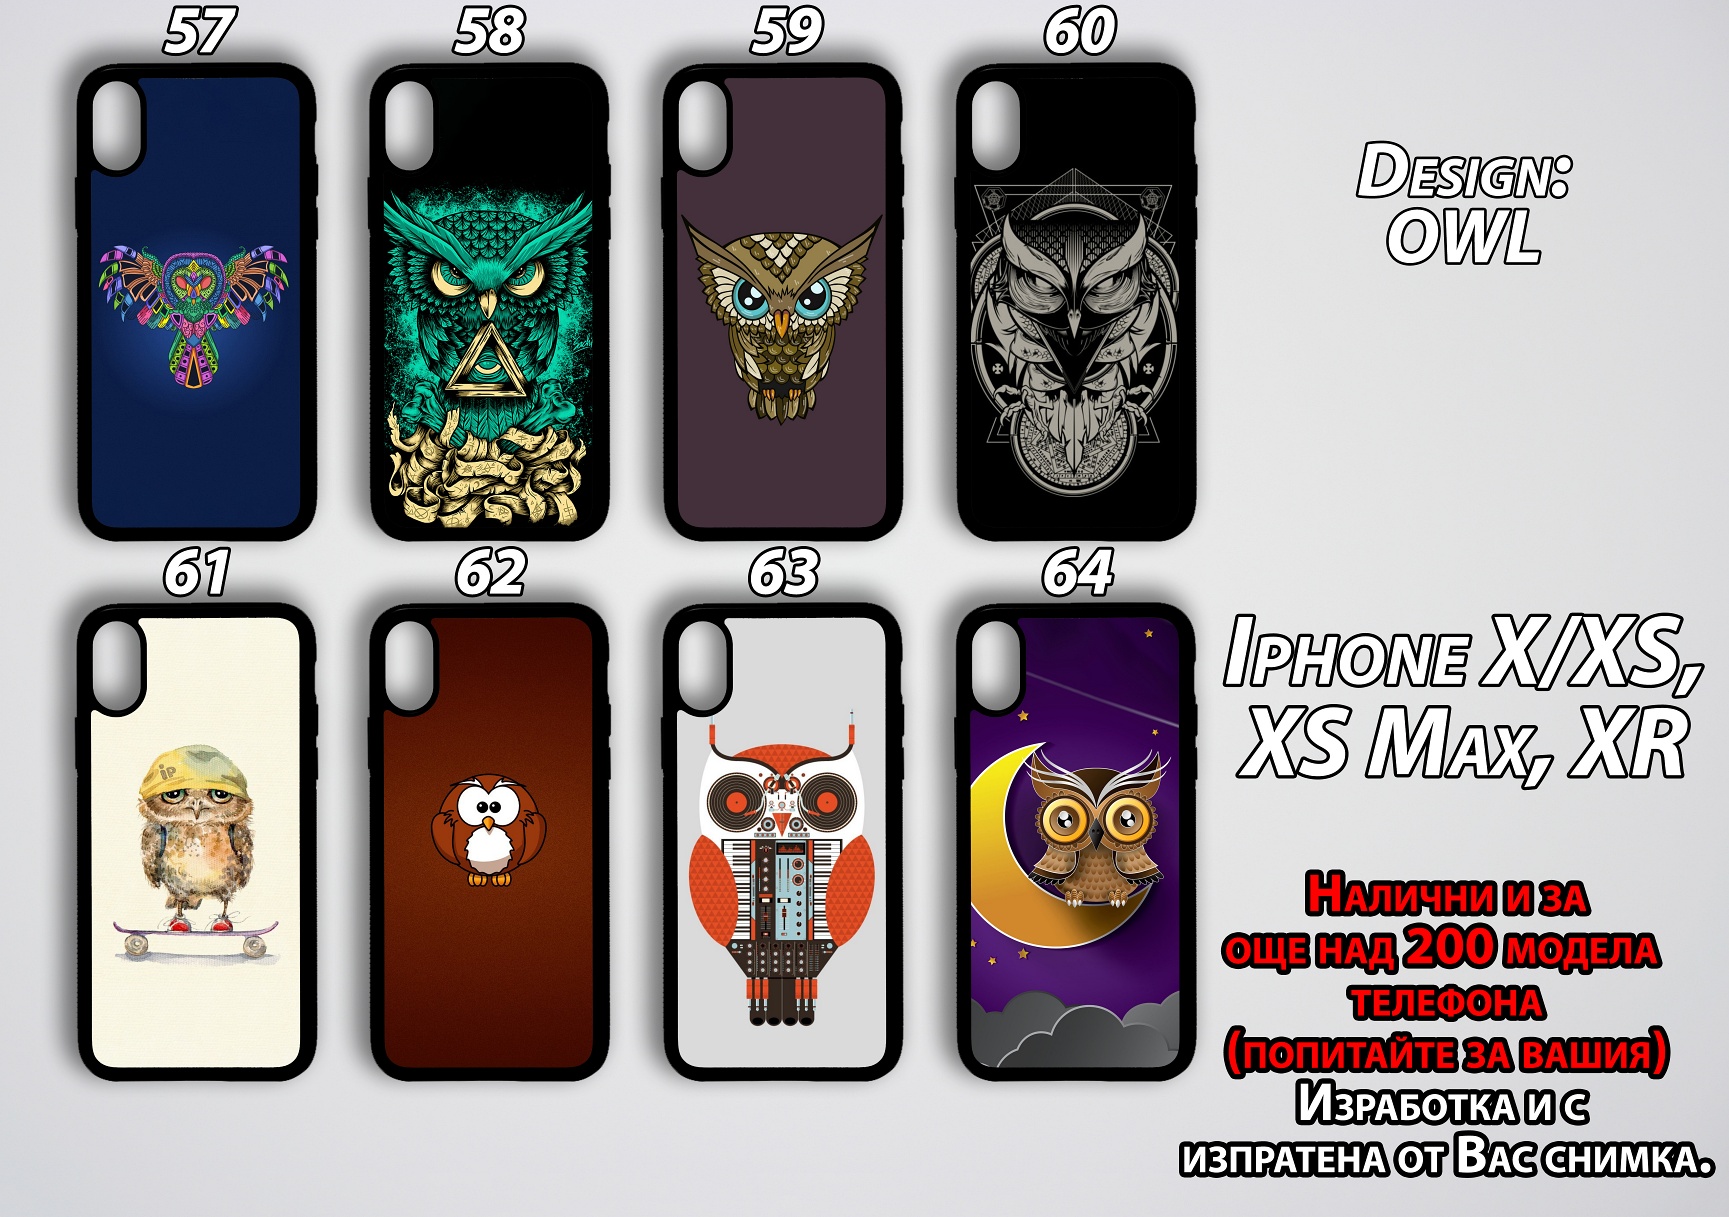 mobile phone cases Owl 57